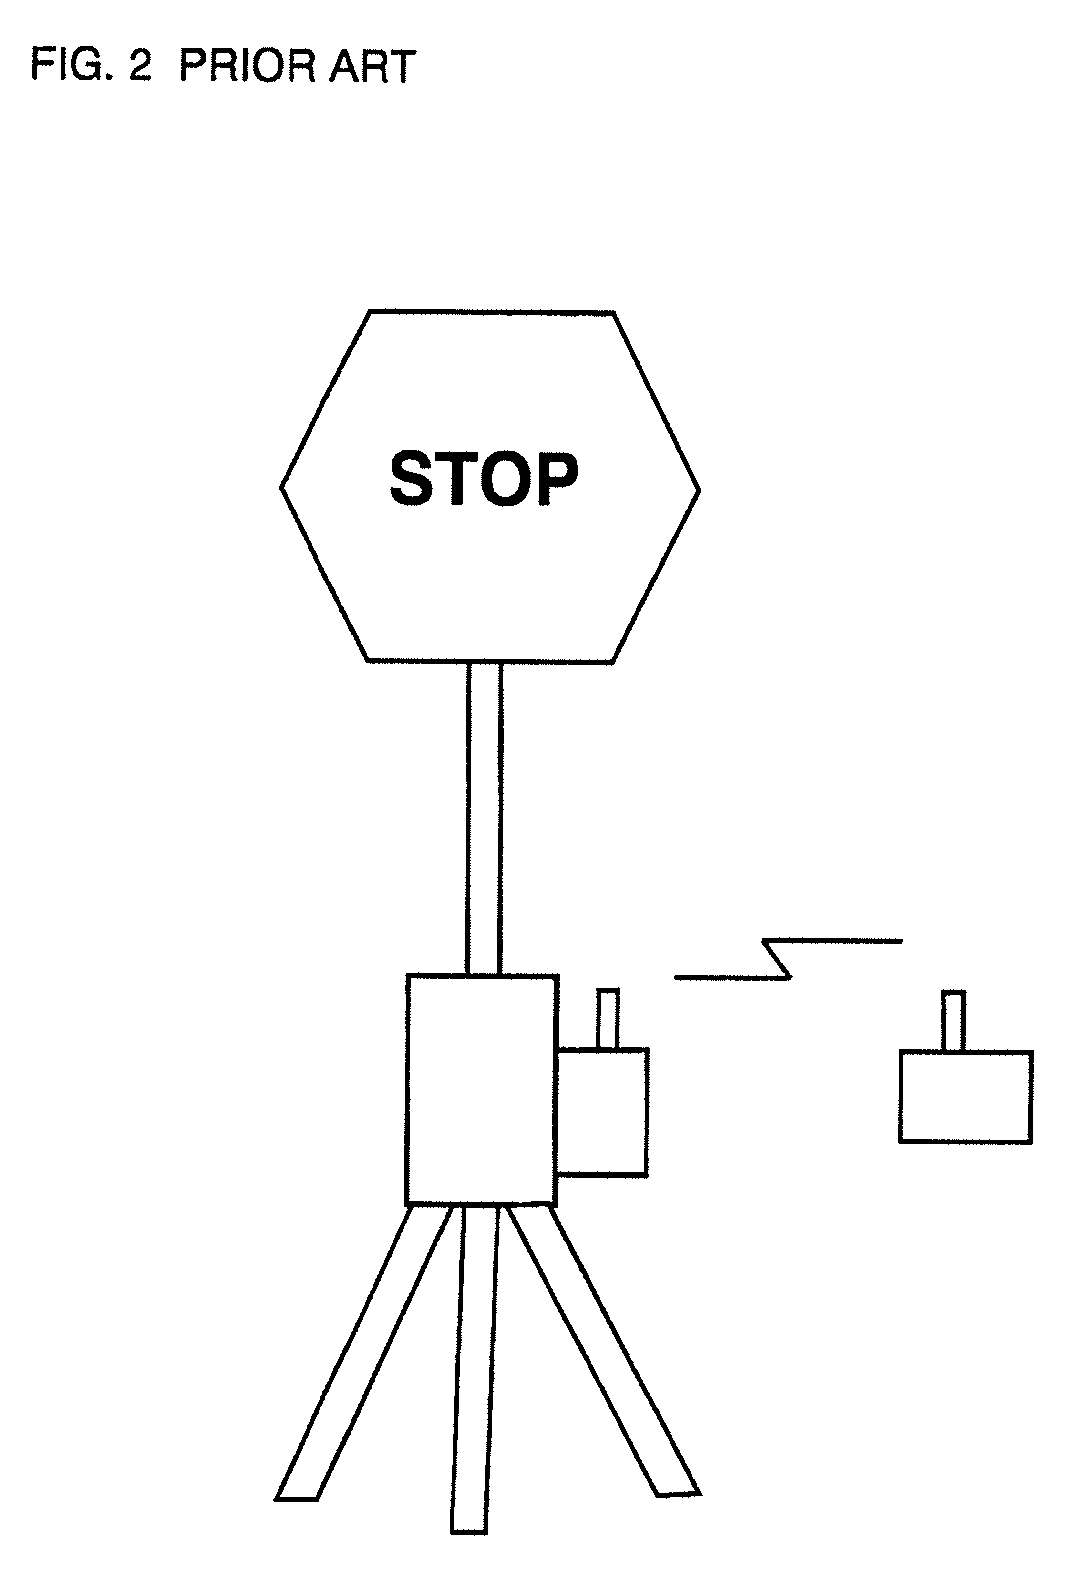 Remote Controlled Mobile Traffic Control System and Method